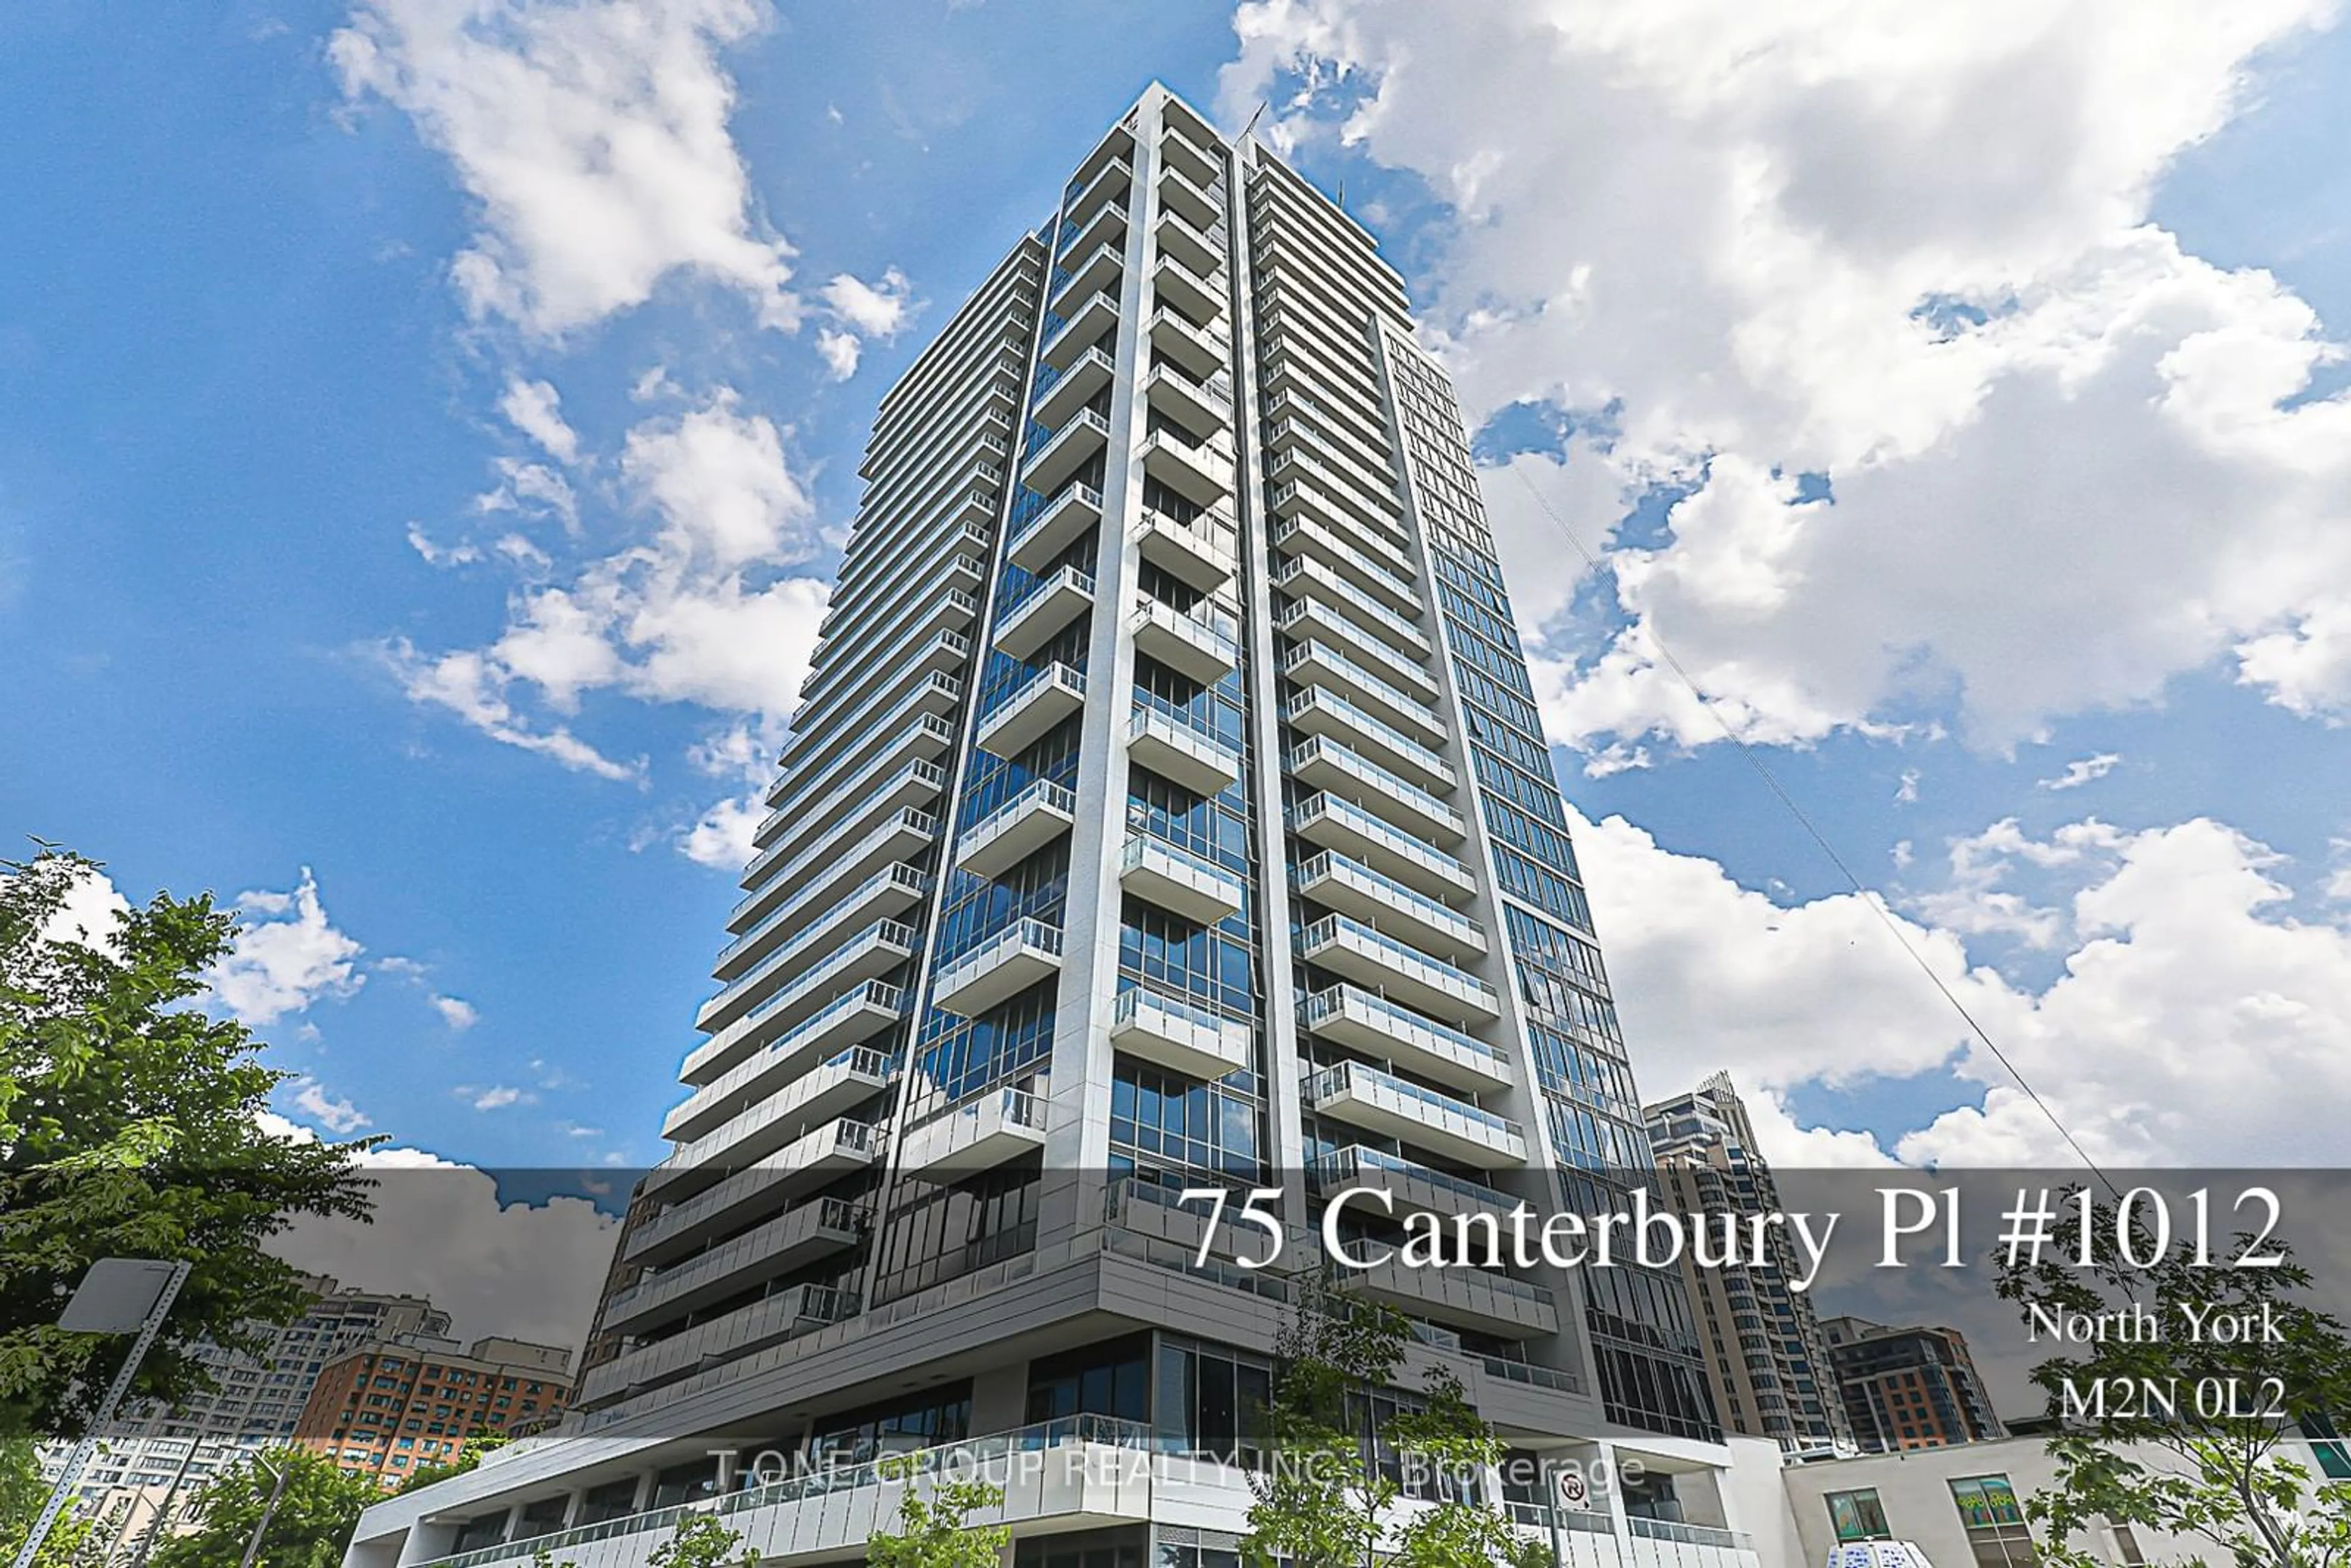 A pic from exterior of the house or condo for 75 Canterbury Pl #1012, Toronto Ontario M2N 0L2